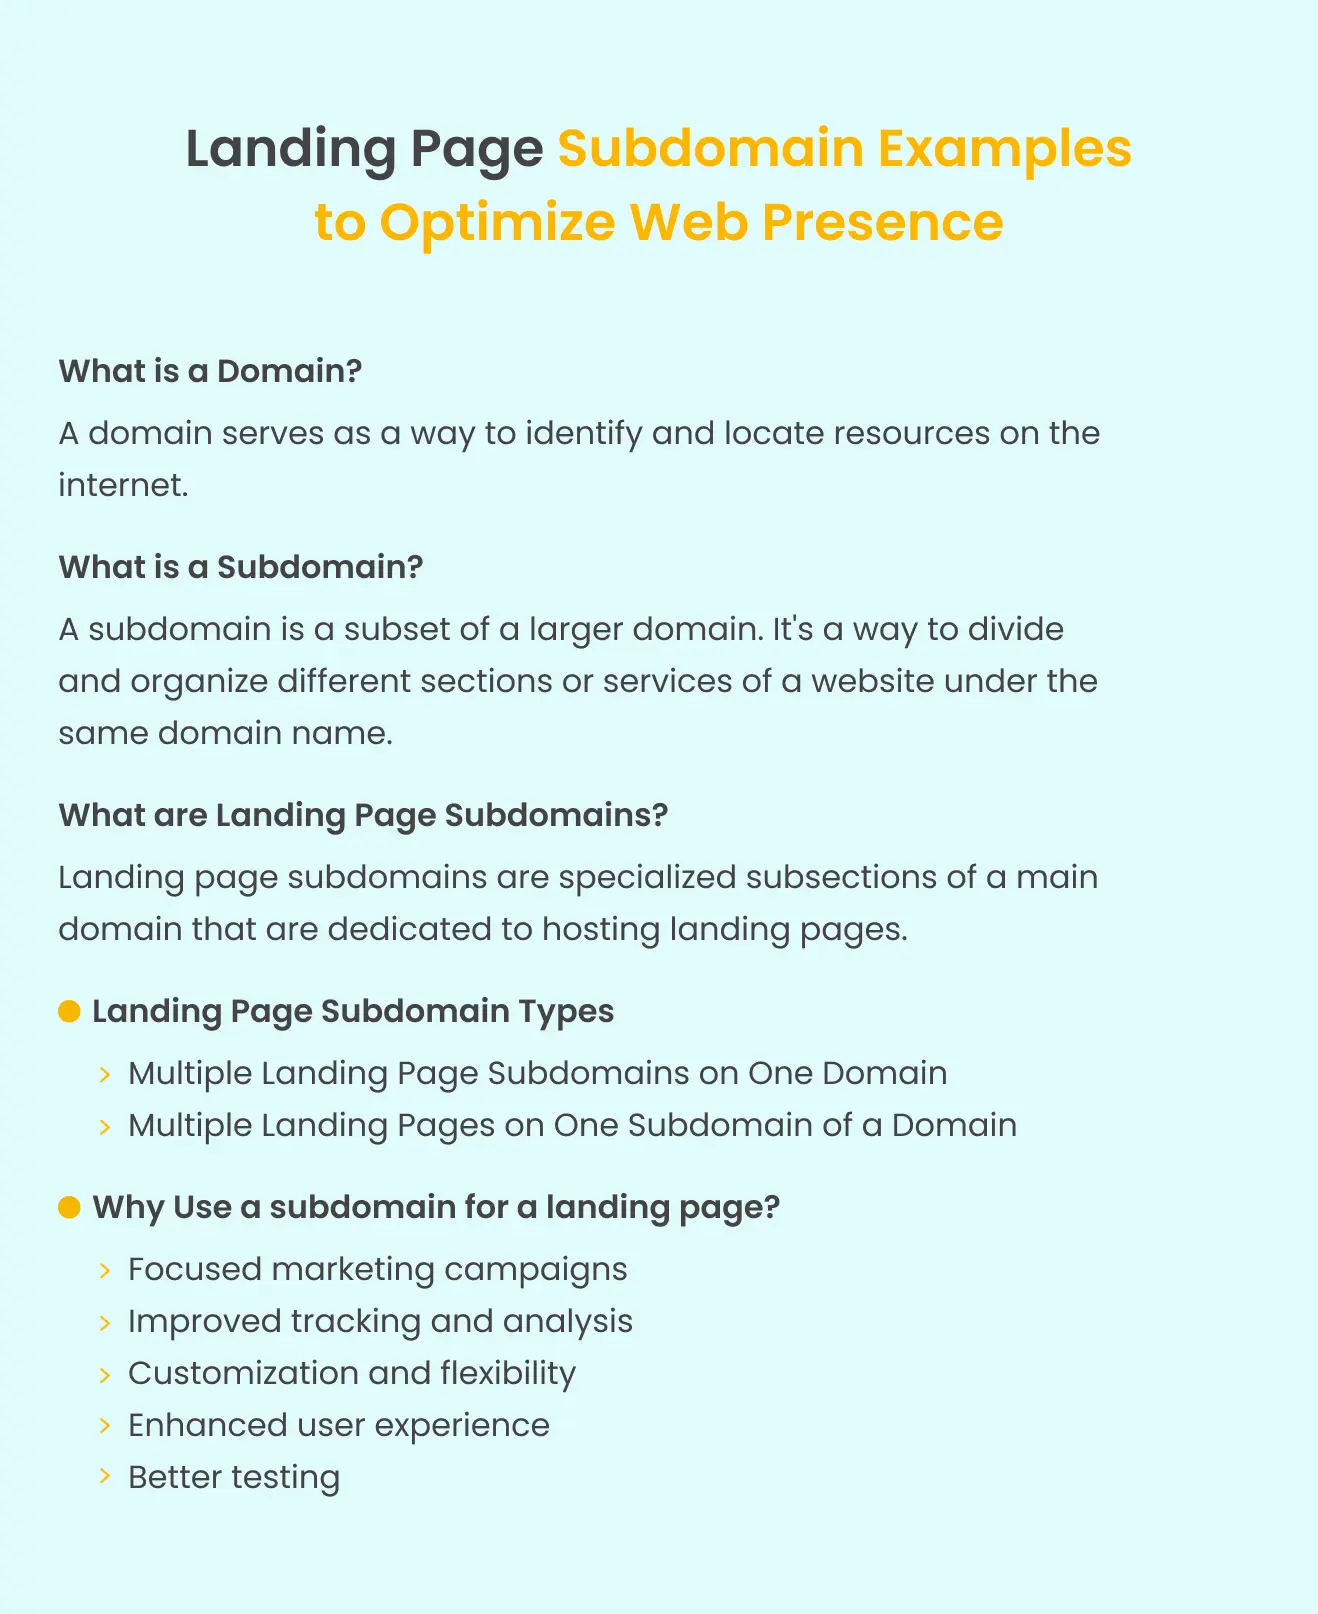 landing-page-subdomain-examples-summary.webp